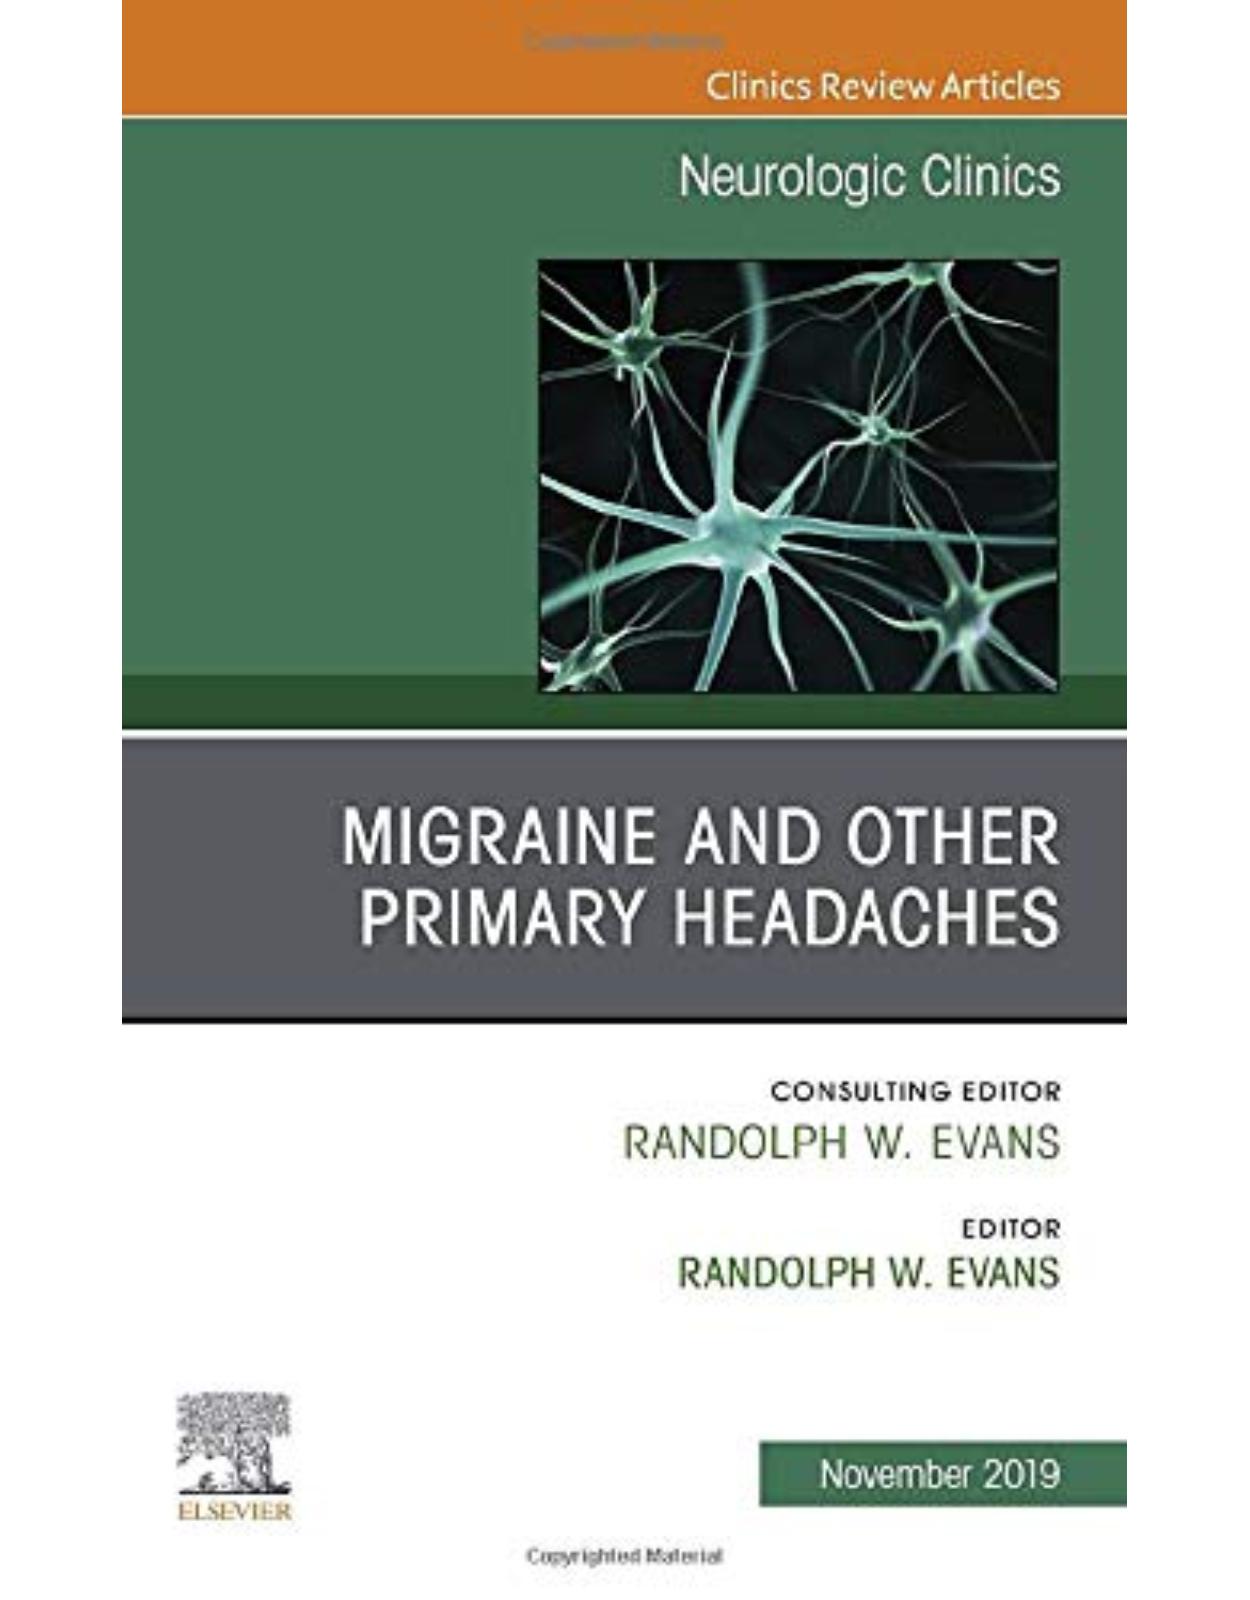 Migraine and other Primary Headaches, An Issue of Neurologic Clinics, Volume 37-4